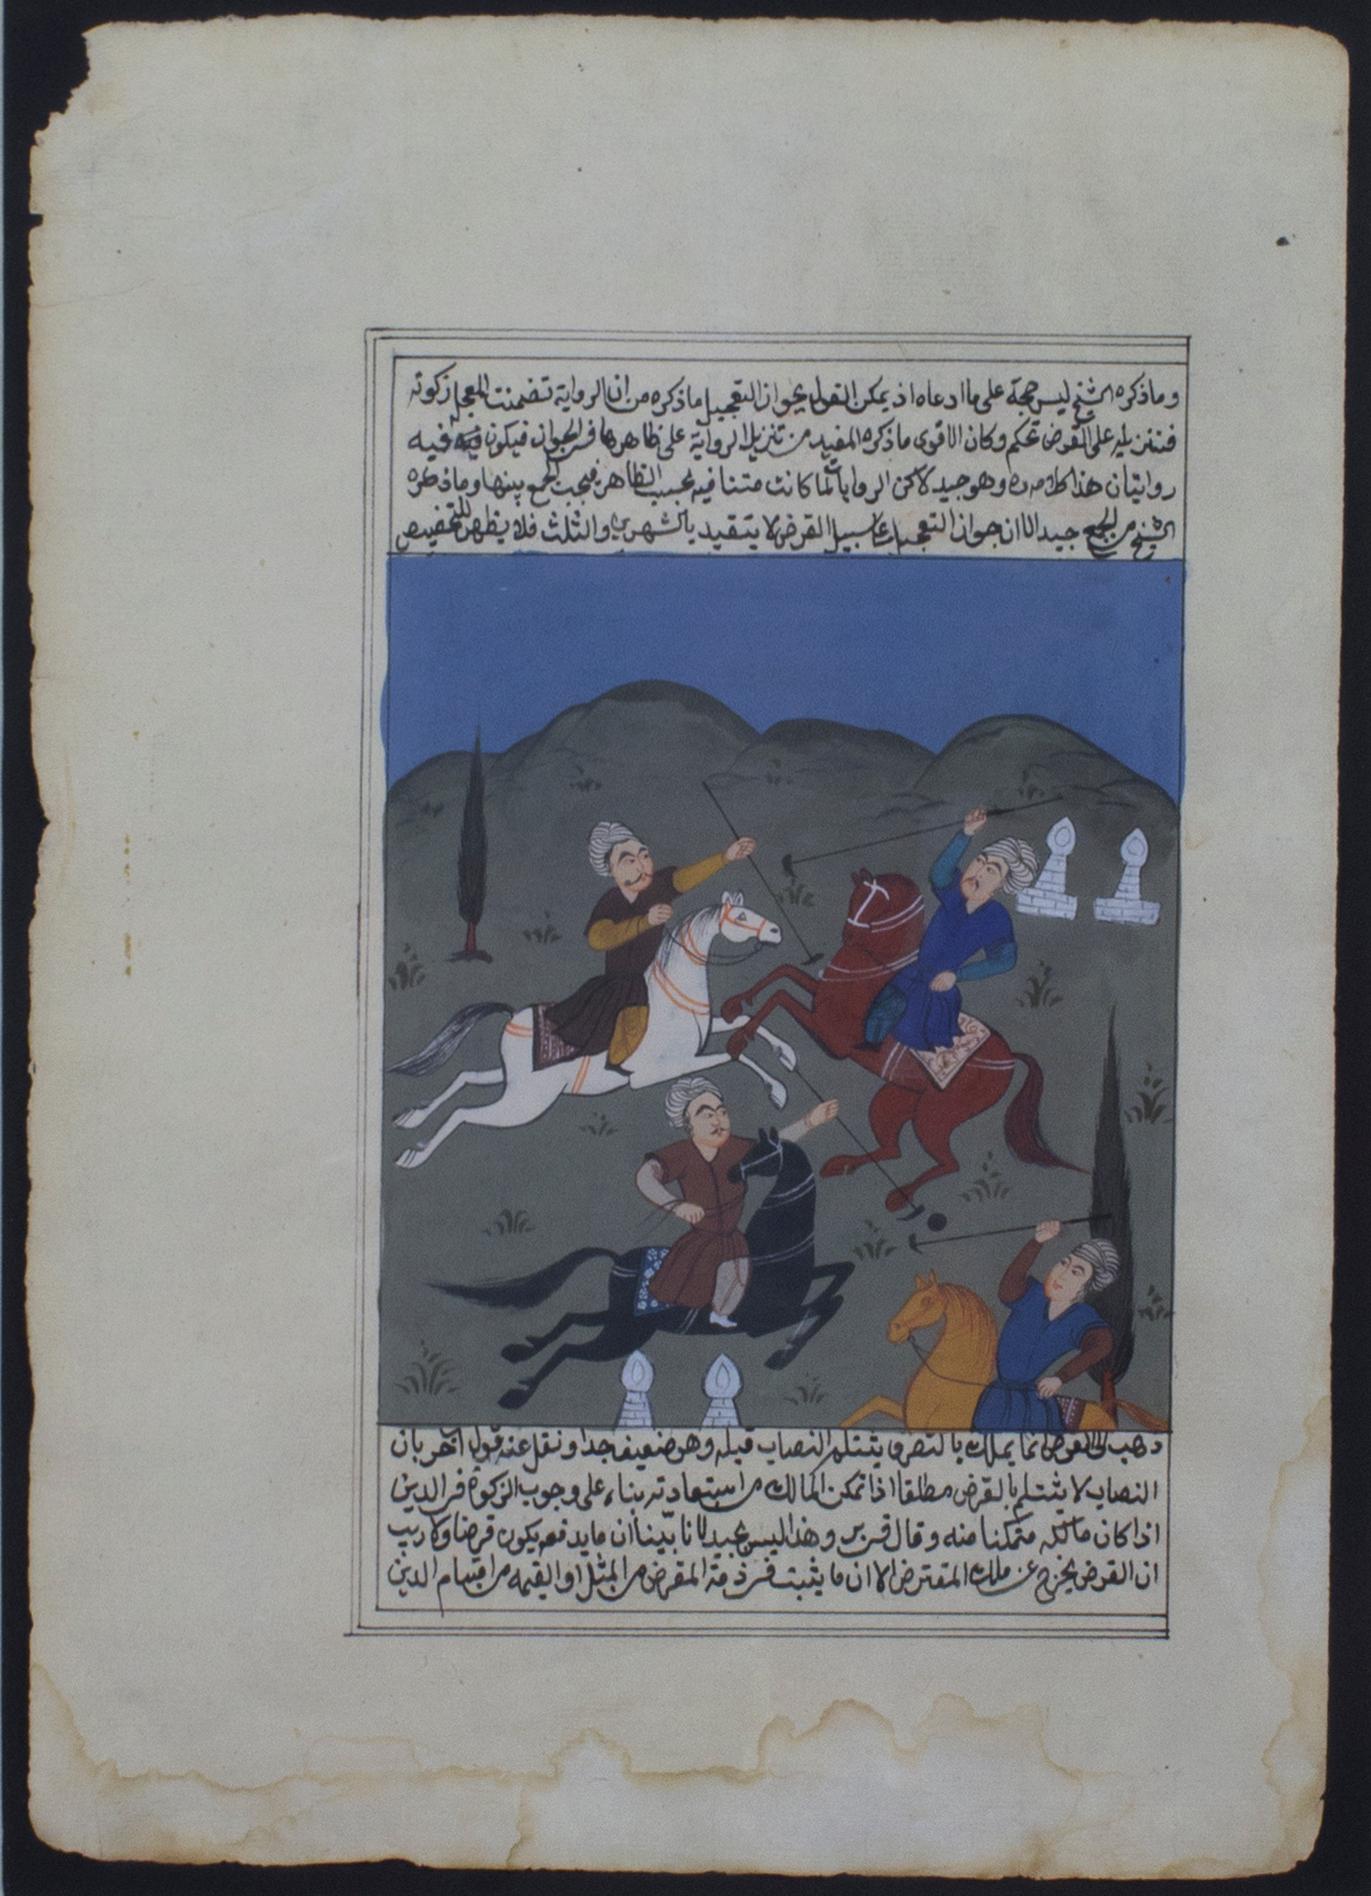 Persian Illuminated Miniature with Four Figures Playing Polo in a Landscape